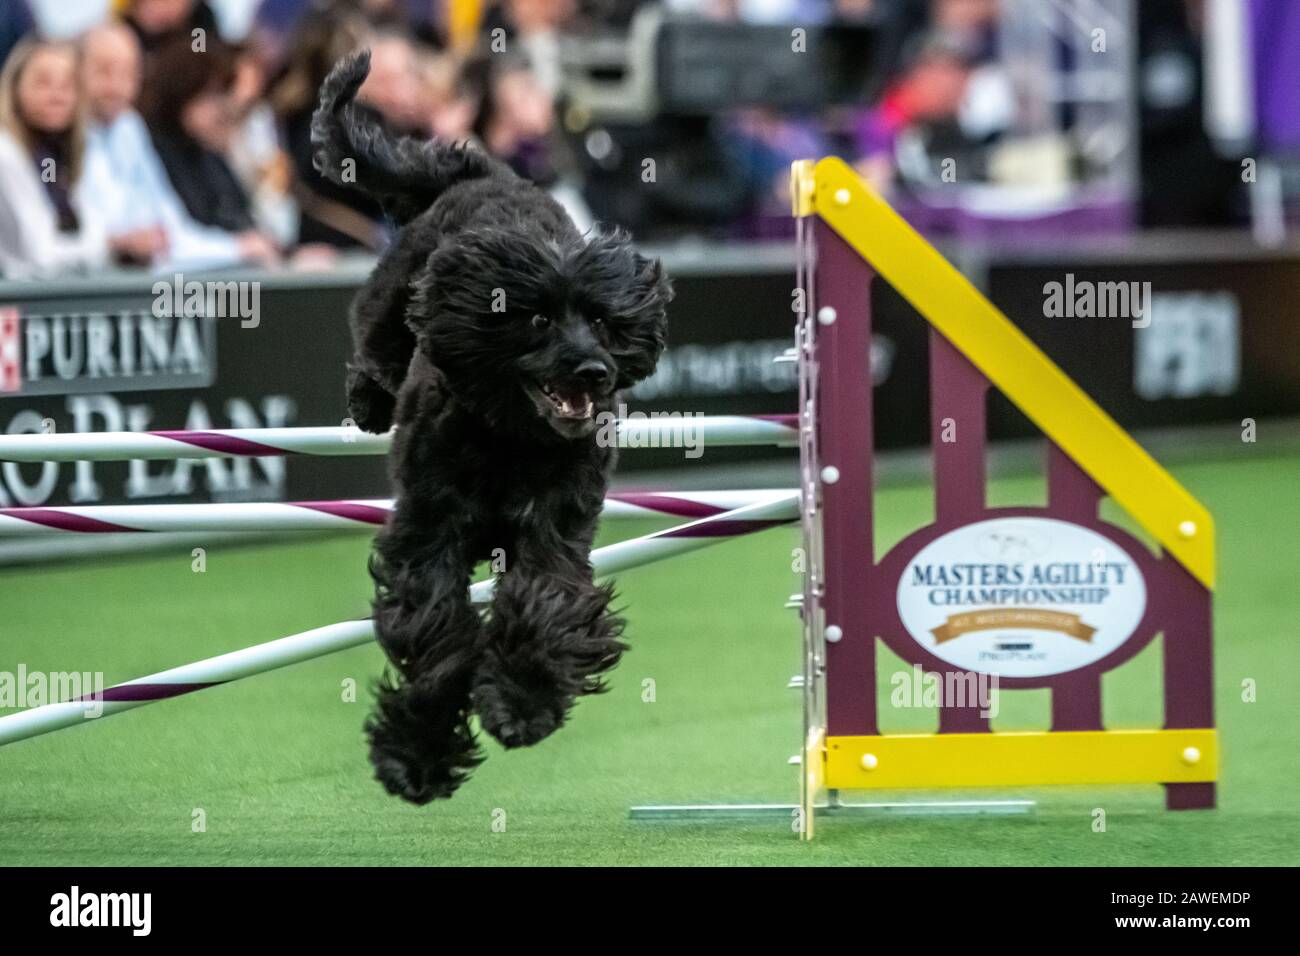 New York, USA. 8th Feb, 2020. Baco, a Portuguese Water Dog, clears an obstacle during the qualifying round of The Westminster Kennel Club Dog show Masters Agility Championship in New York city. Credit: Enrique Shore/Alamy Live News Stock Photo